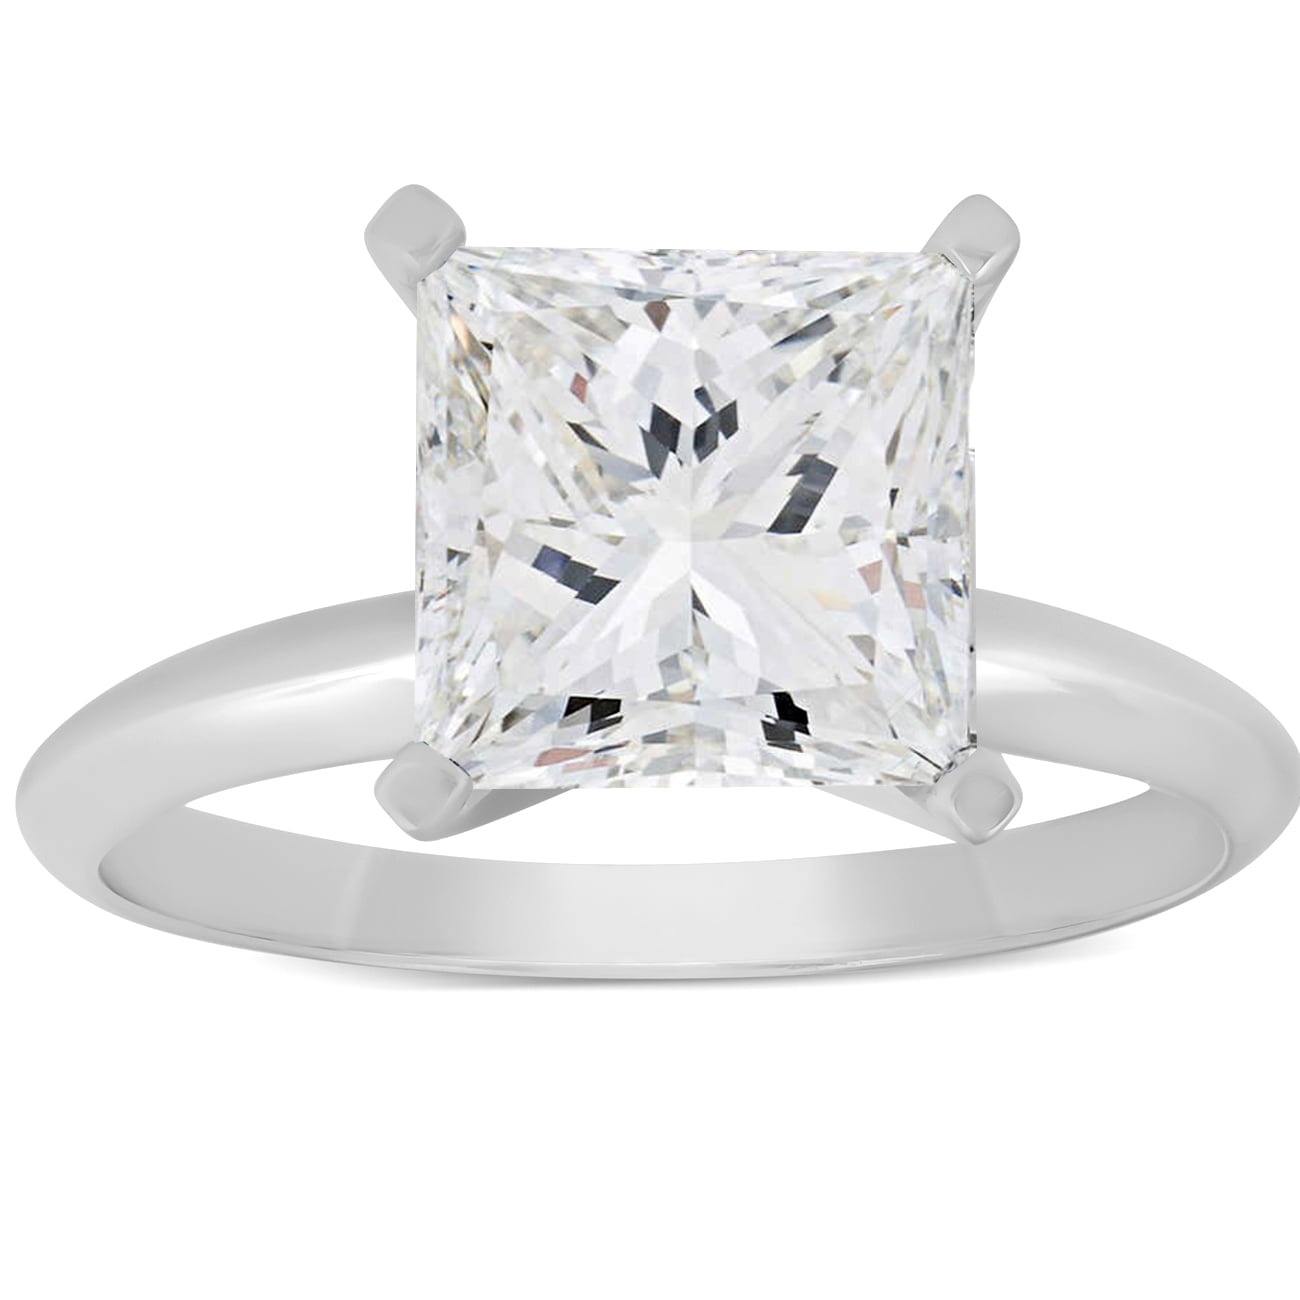 1.25 Ct Princess Cut Diamond Solitaire Engagement Ring Solid 14K White Gold 